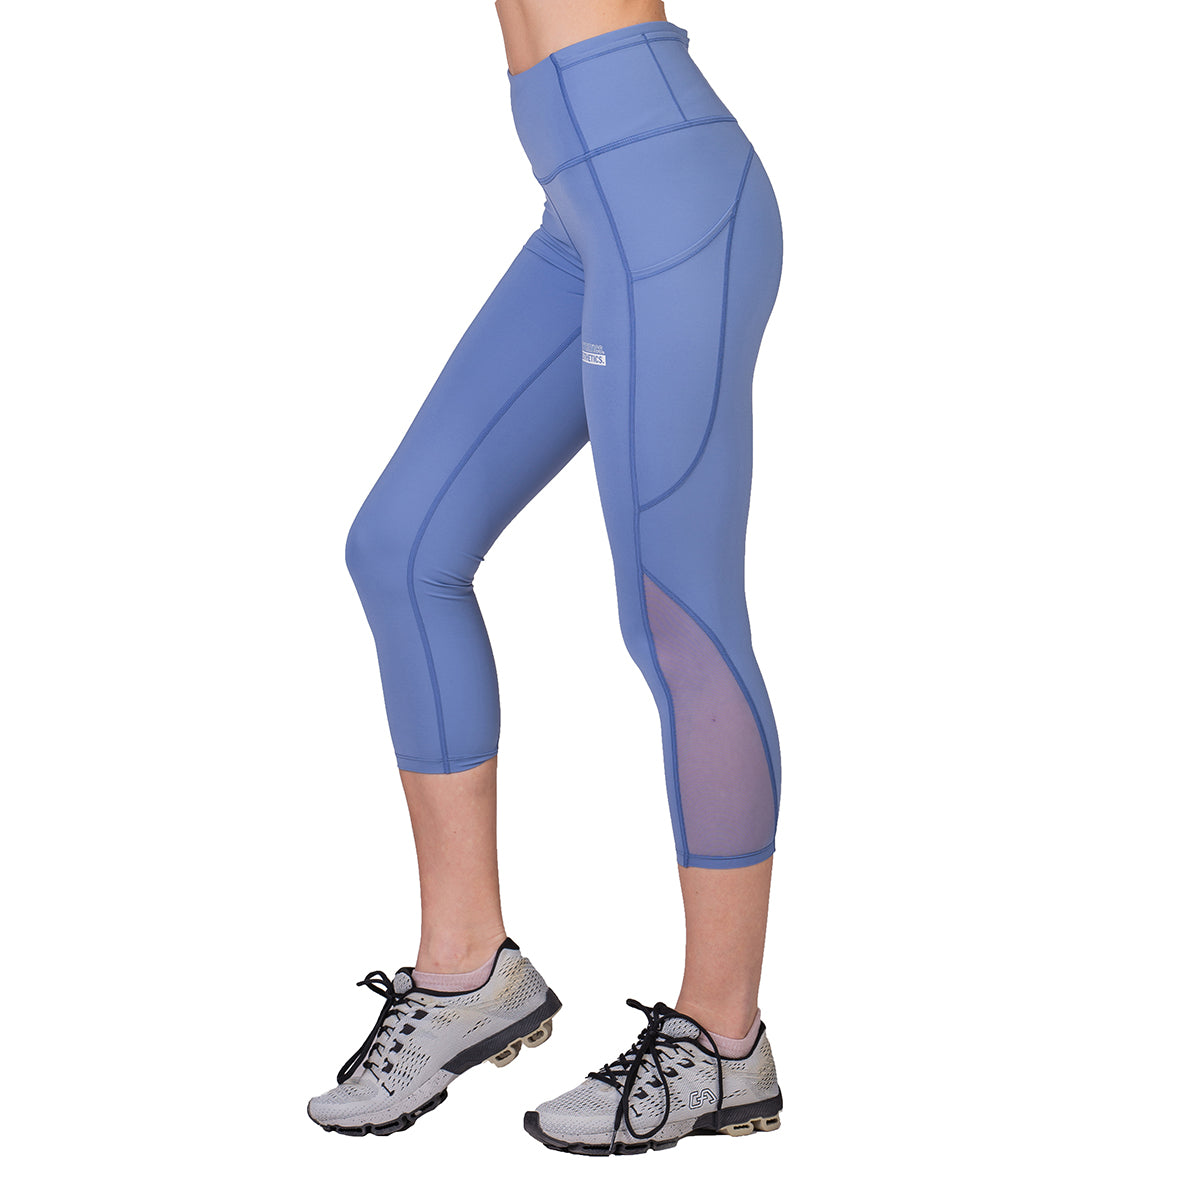 Activewear Workout Cropped Leggings for Women